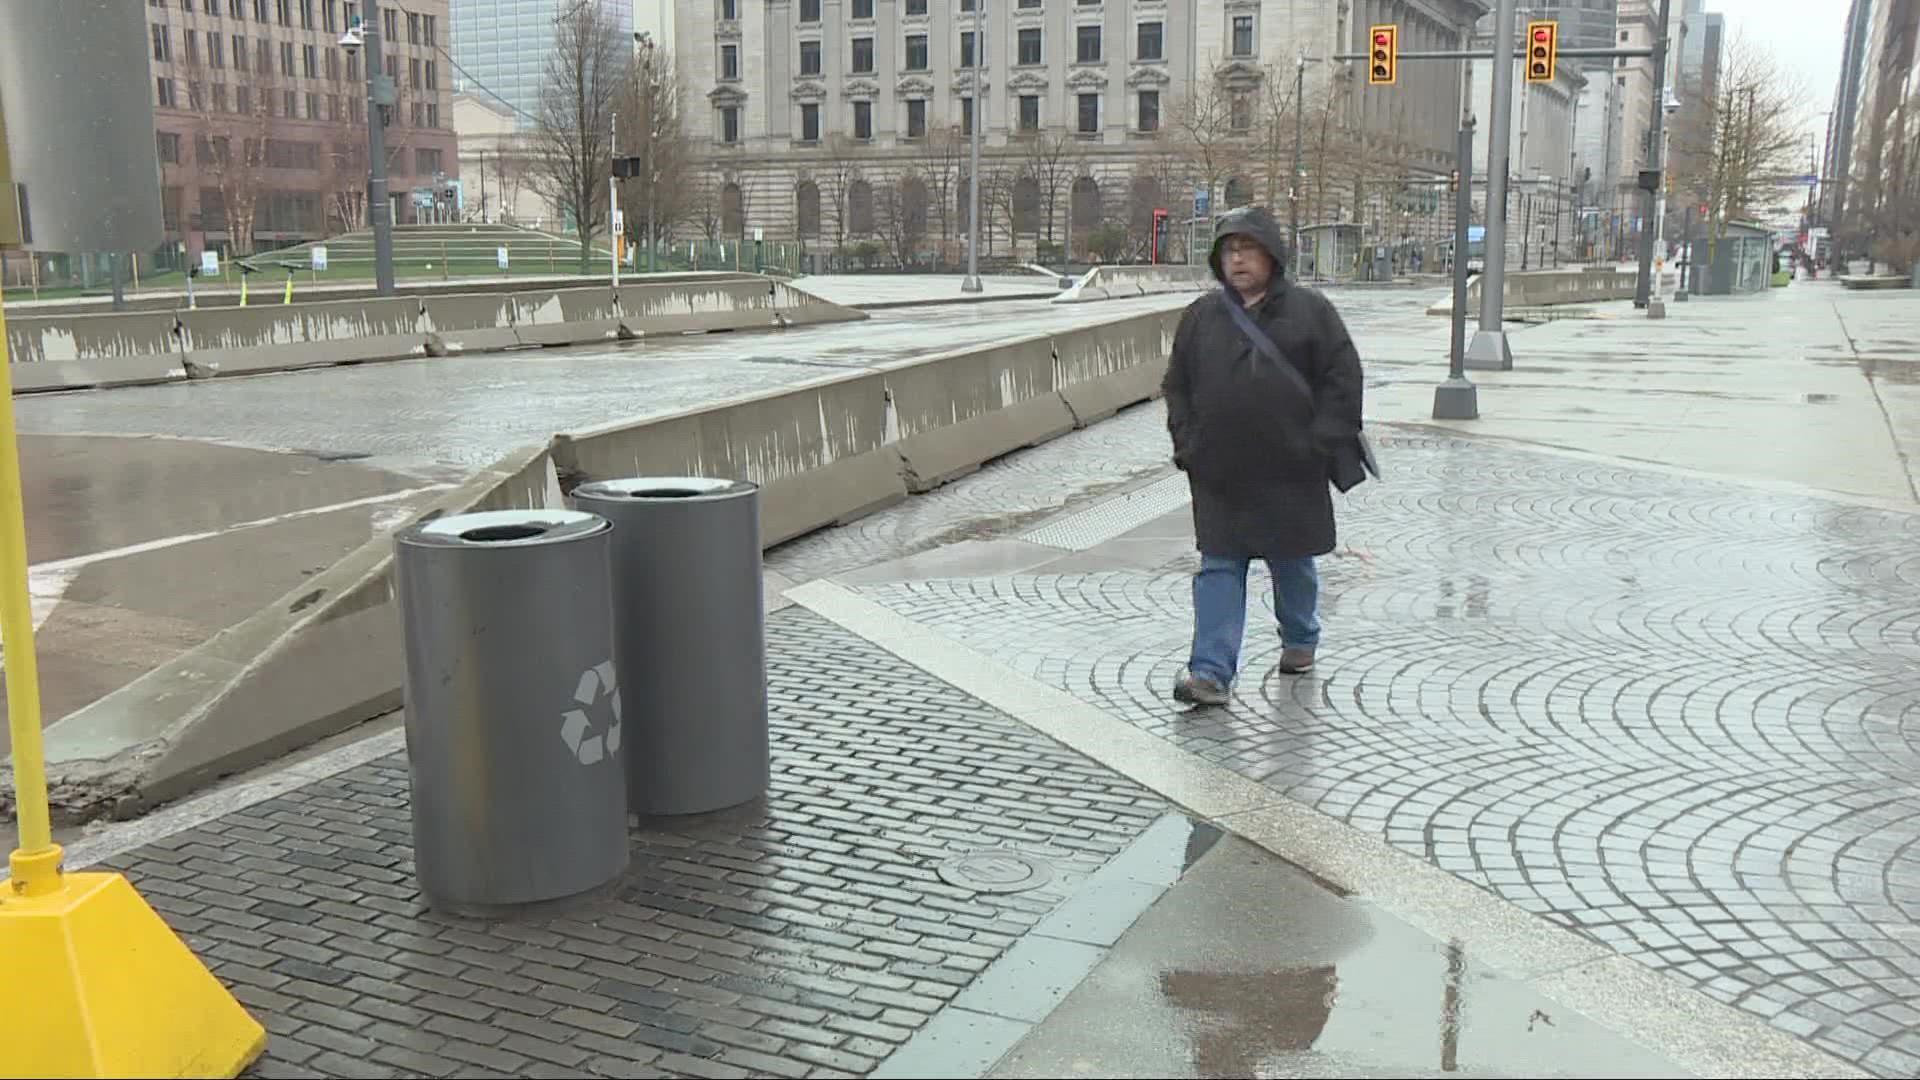 The concrete barriers have been at Public Square since 2017. The city will pay $1.5 million of the estimated $3 million cost of the project.